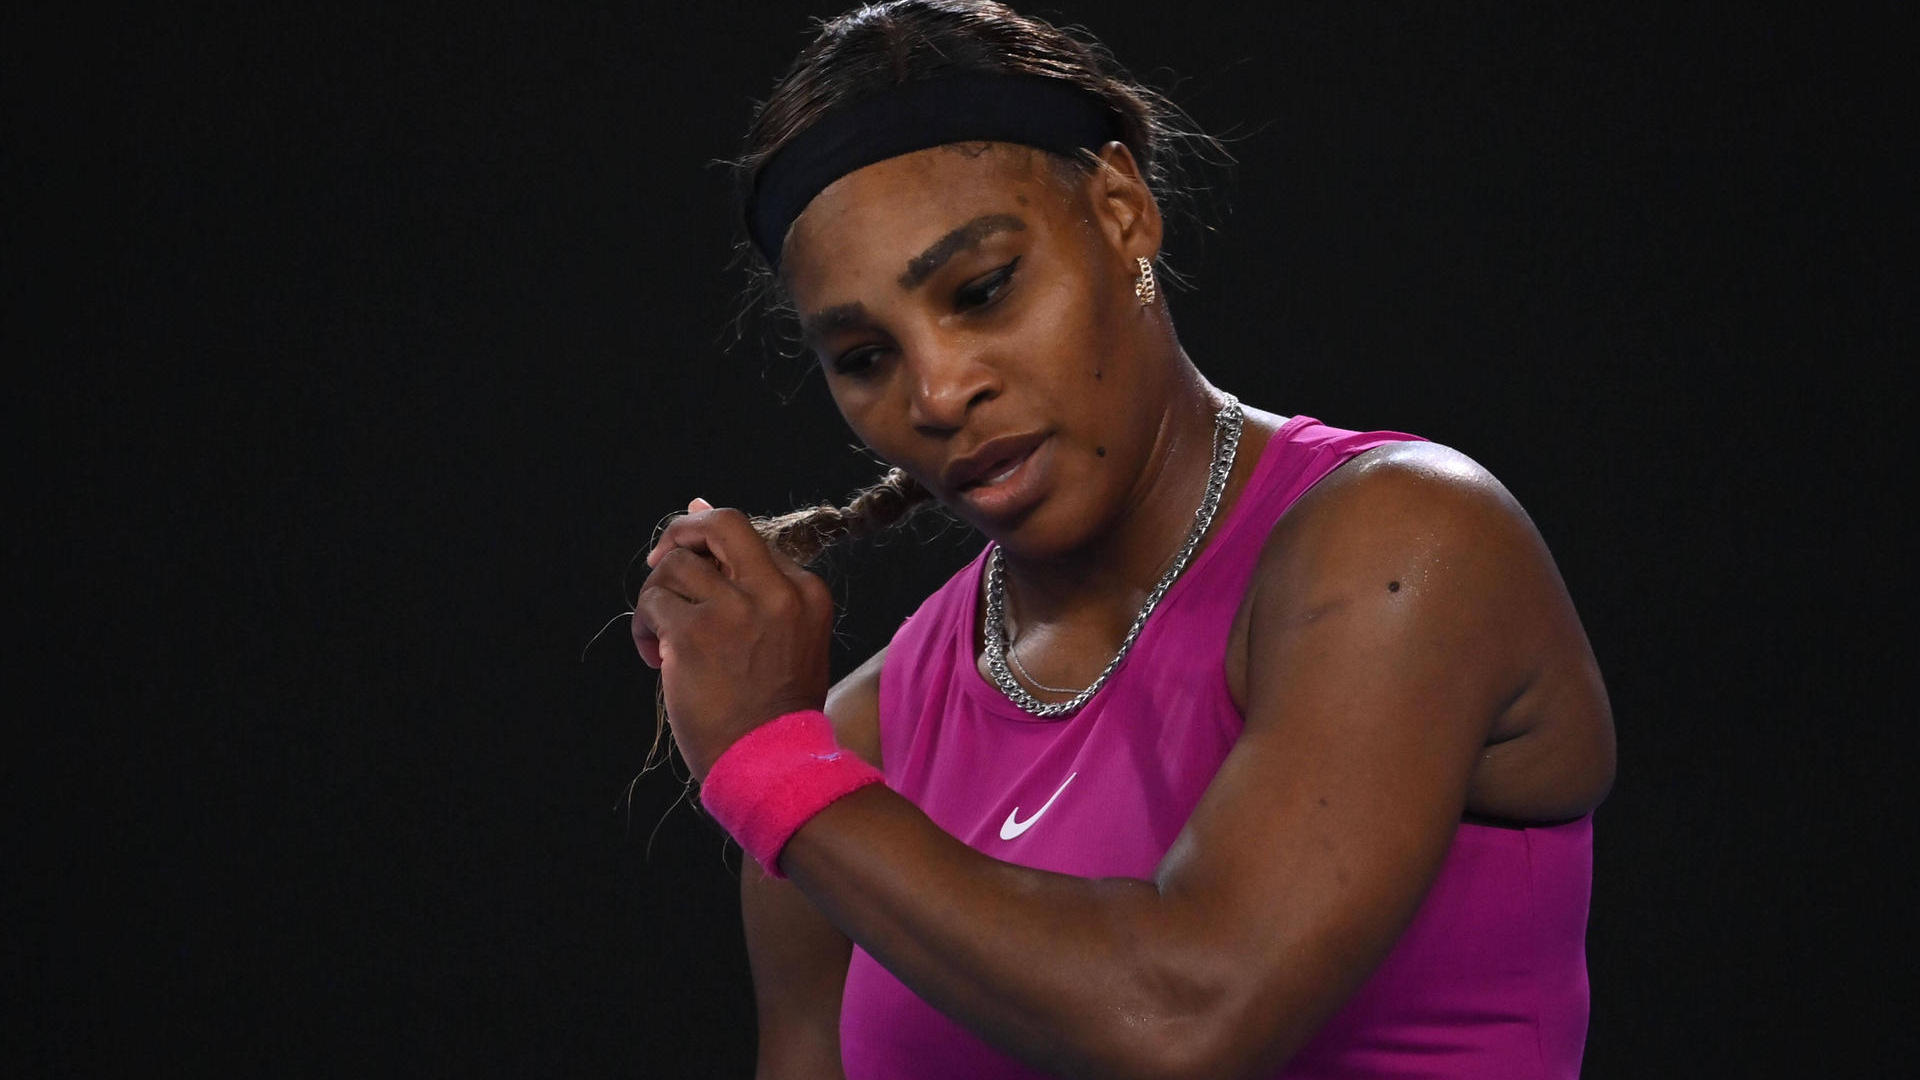 Tennis icon Serena Williams surrenders due to injury